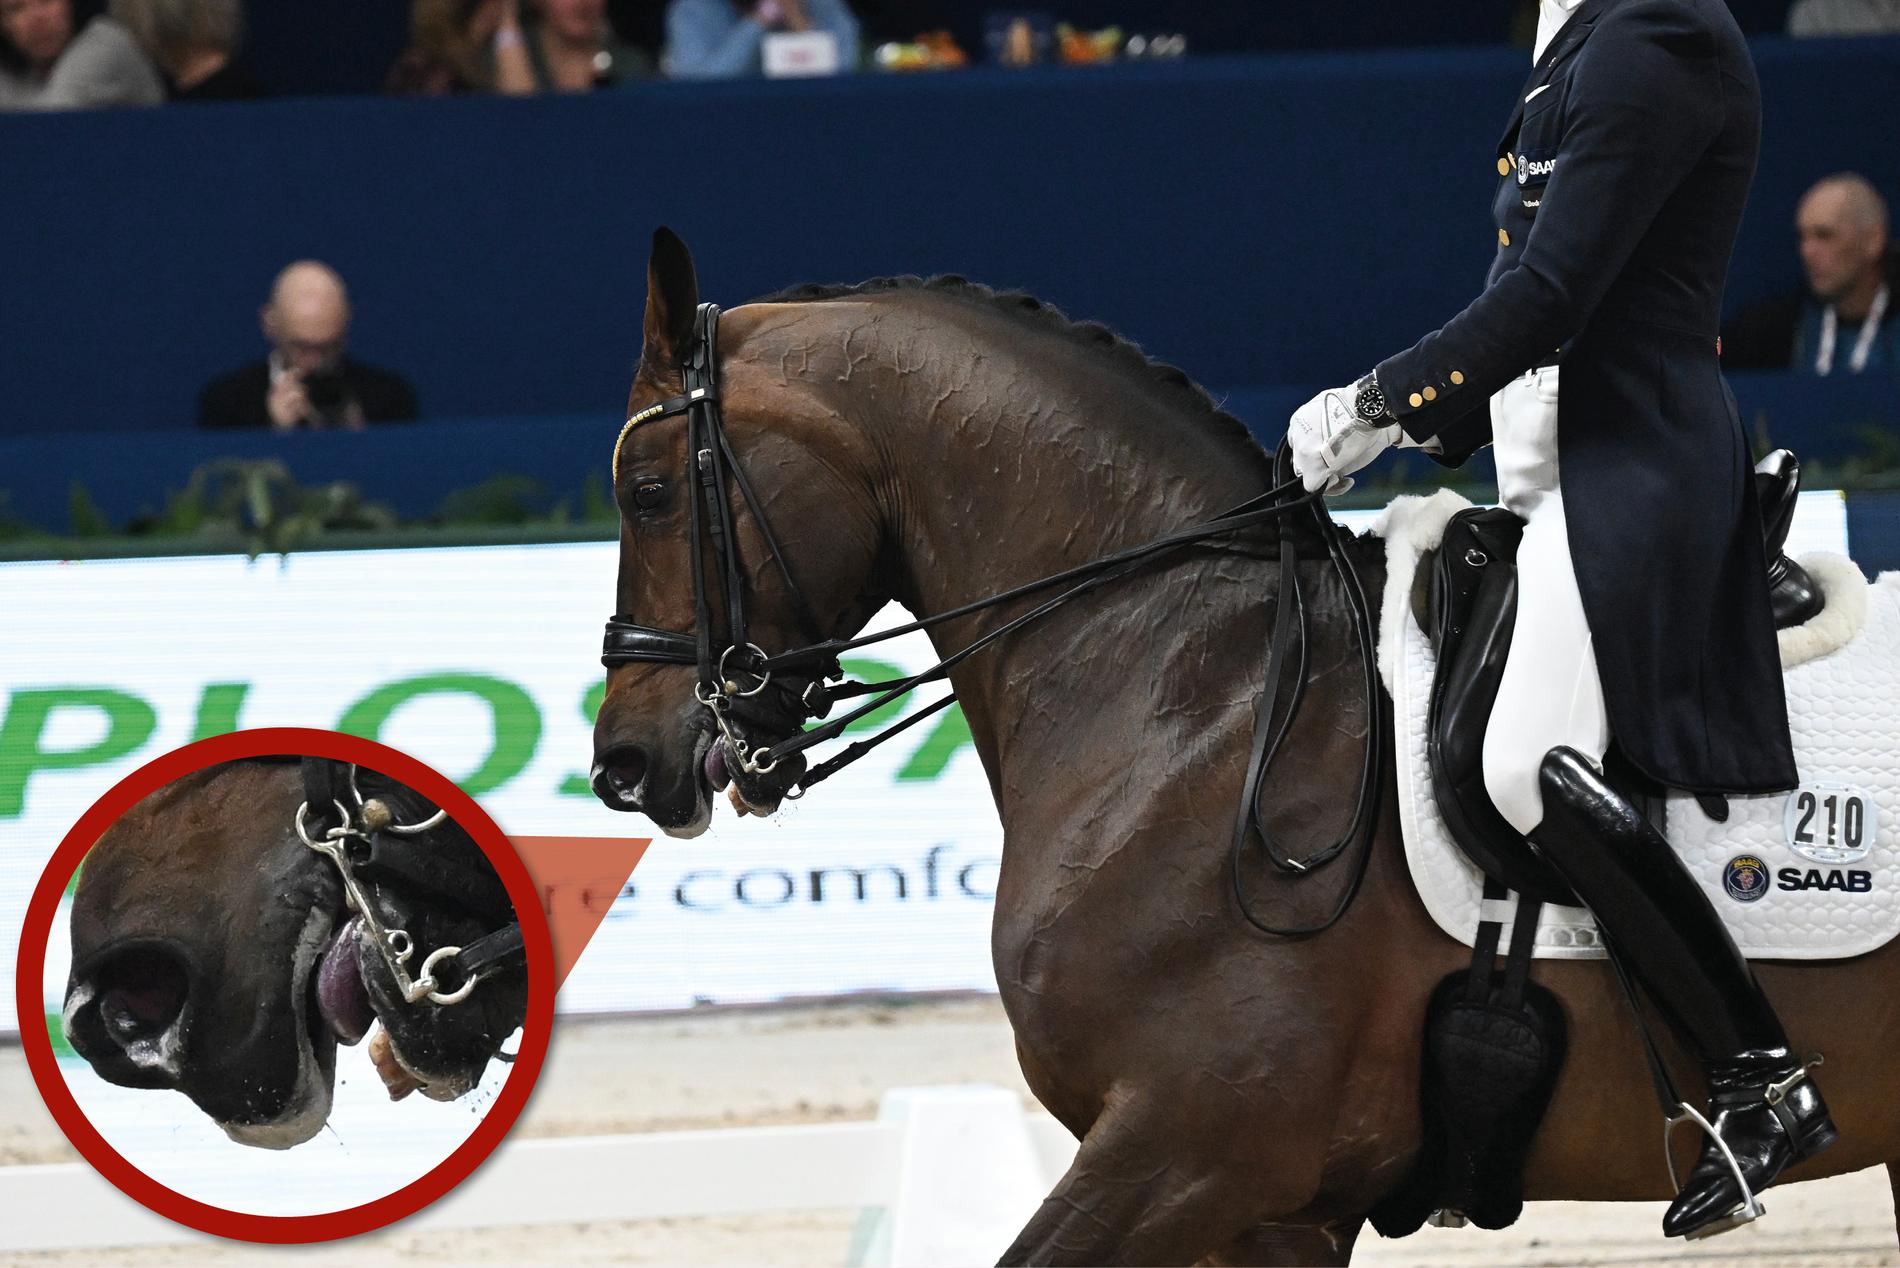  At the World Cup competition in Amsterdam on January 27, the tongue of Patrik Kittel's horse Touchdown turned gray-blue. Patrik Kittel finished third in the class.